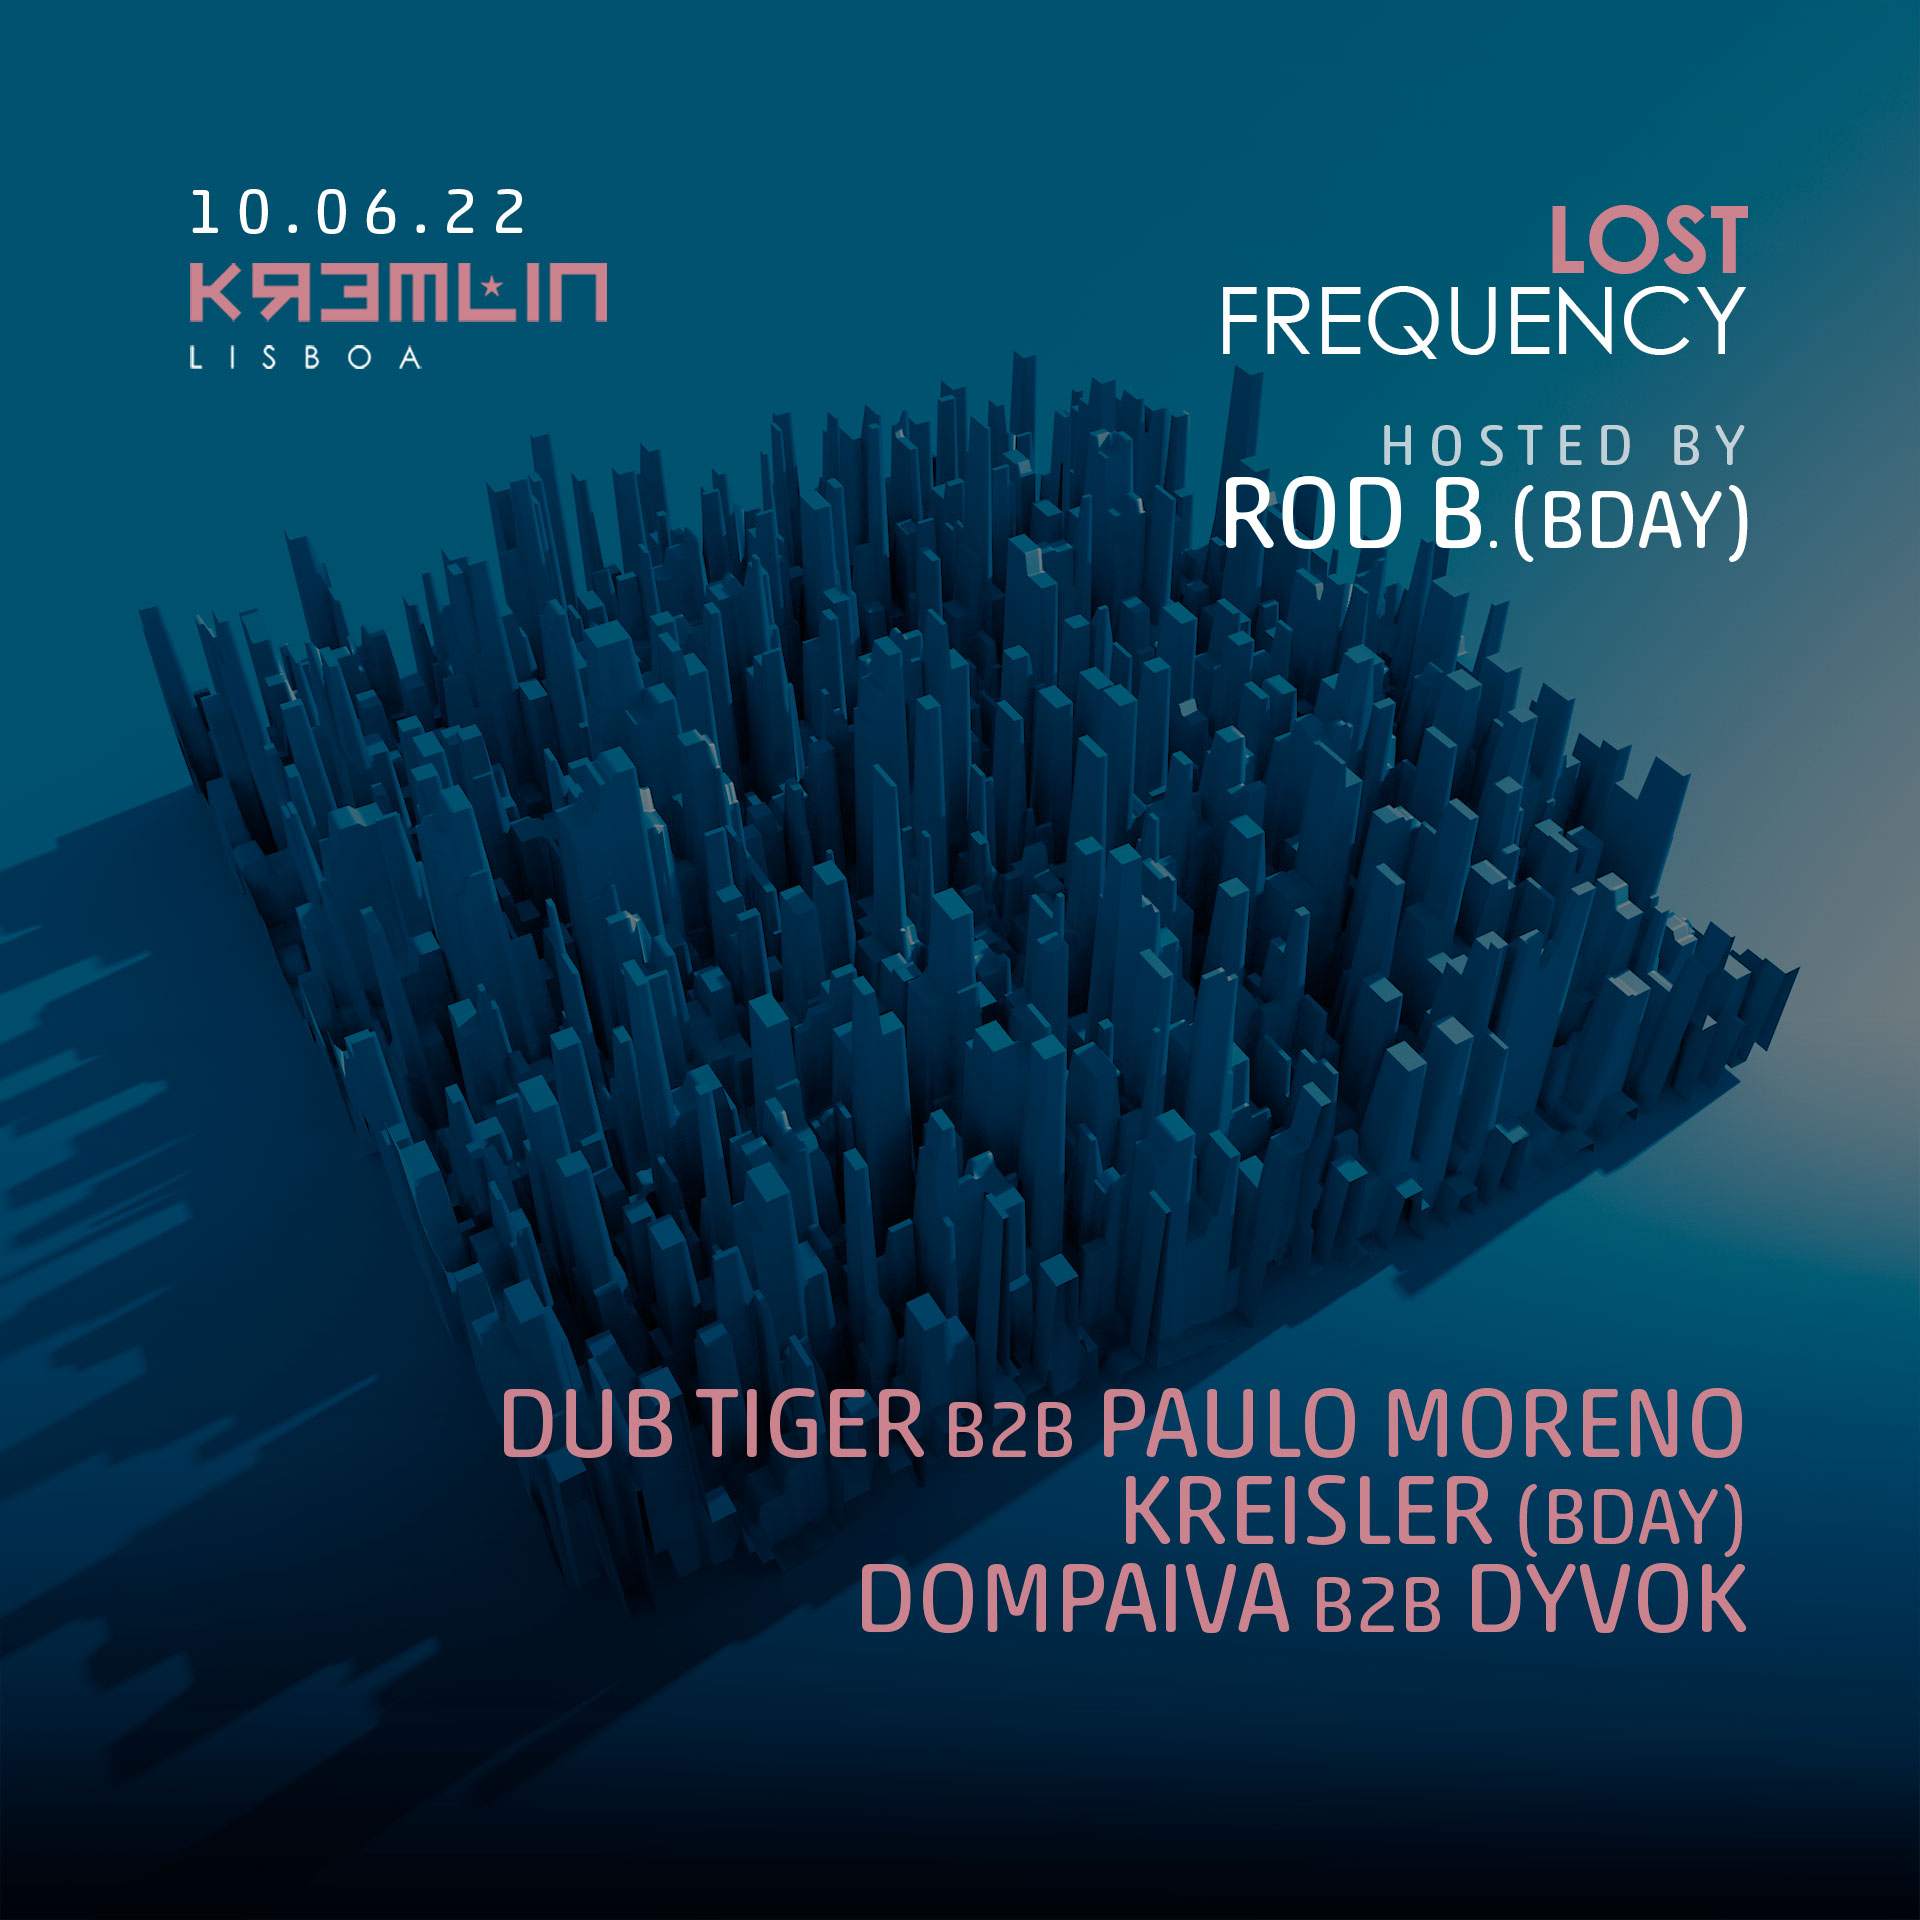 Lost Frequency - Hosted by Rod B - Página frontal